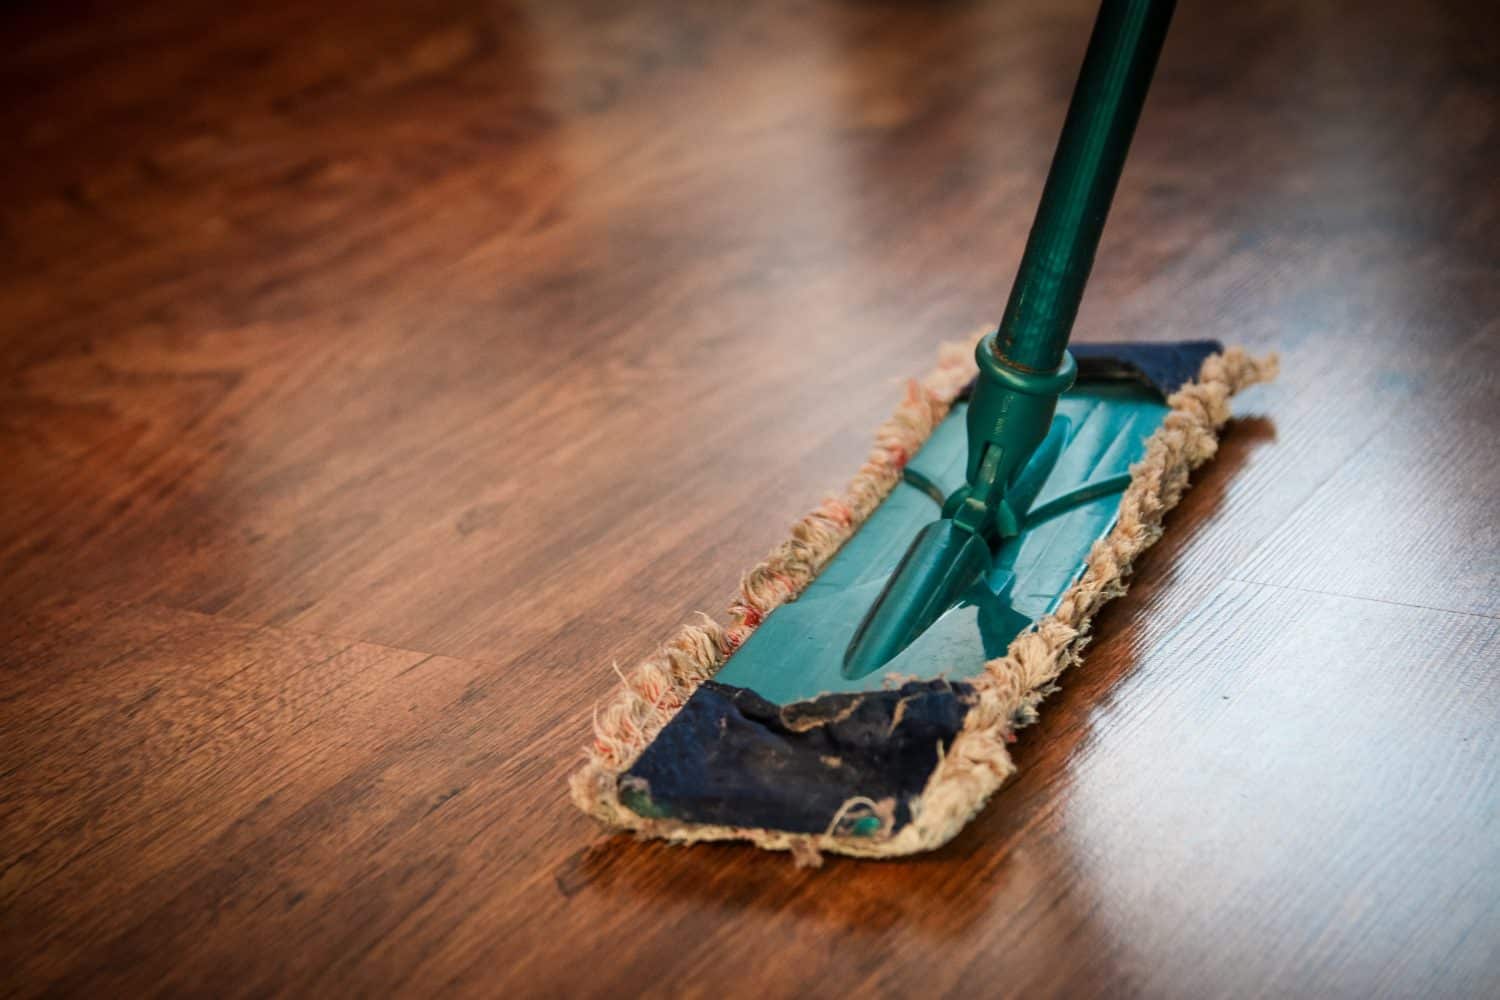 13 latin american startups with effective cleaning platforms